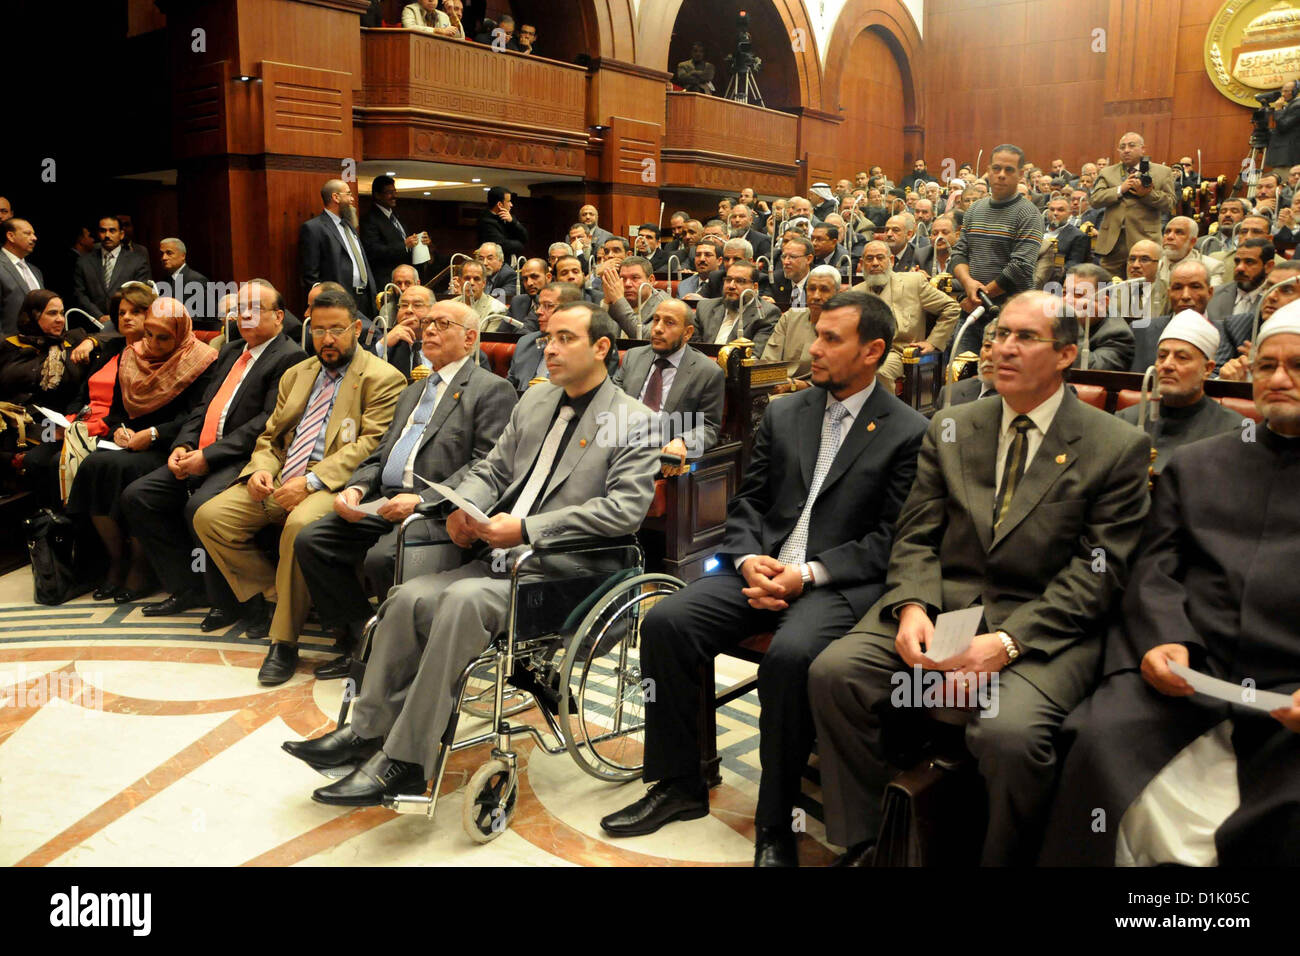 Dec. 26, 2012 - Cairo, Cairo, Egypt - Members of the Egyptian Shura Council (Upper house of the parliament), attend the first meeting after approving the new constitution, in Cairo, Egypt, 26 December 2012. According to the new constitution, the Islamist-dominated Shura Council will assume the legislative power for the first time in 32 years. Official results on 25 December showed that the Egyptian new constitution, favored by supporters of Islamist President Mohamed Morsi, was approved by 63.8 per cent of voters in a two-round referendum  (Credit Image: © Ashraf Amra/APA Images/ZUMAPRESS.com) Stock Photo